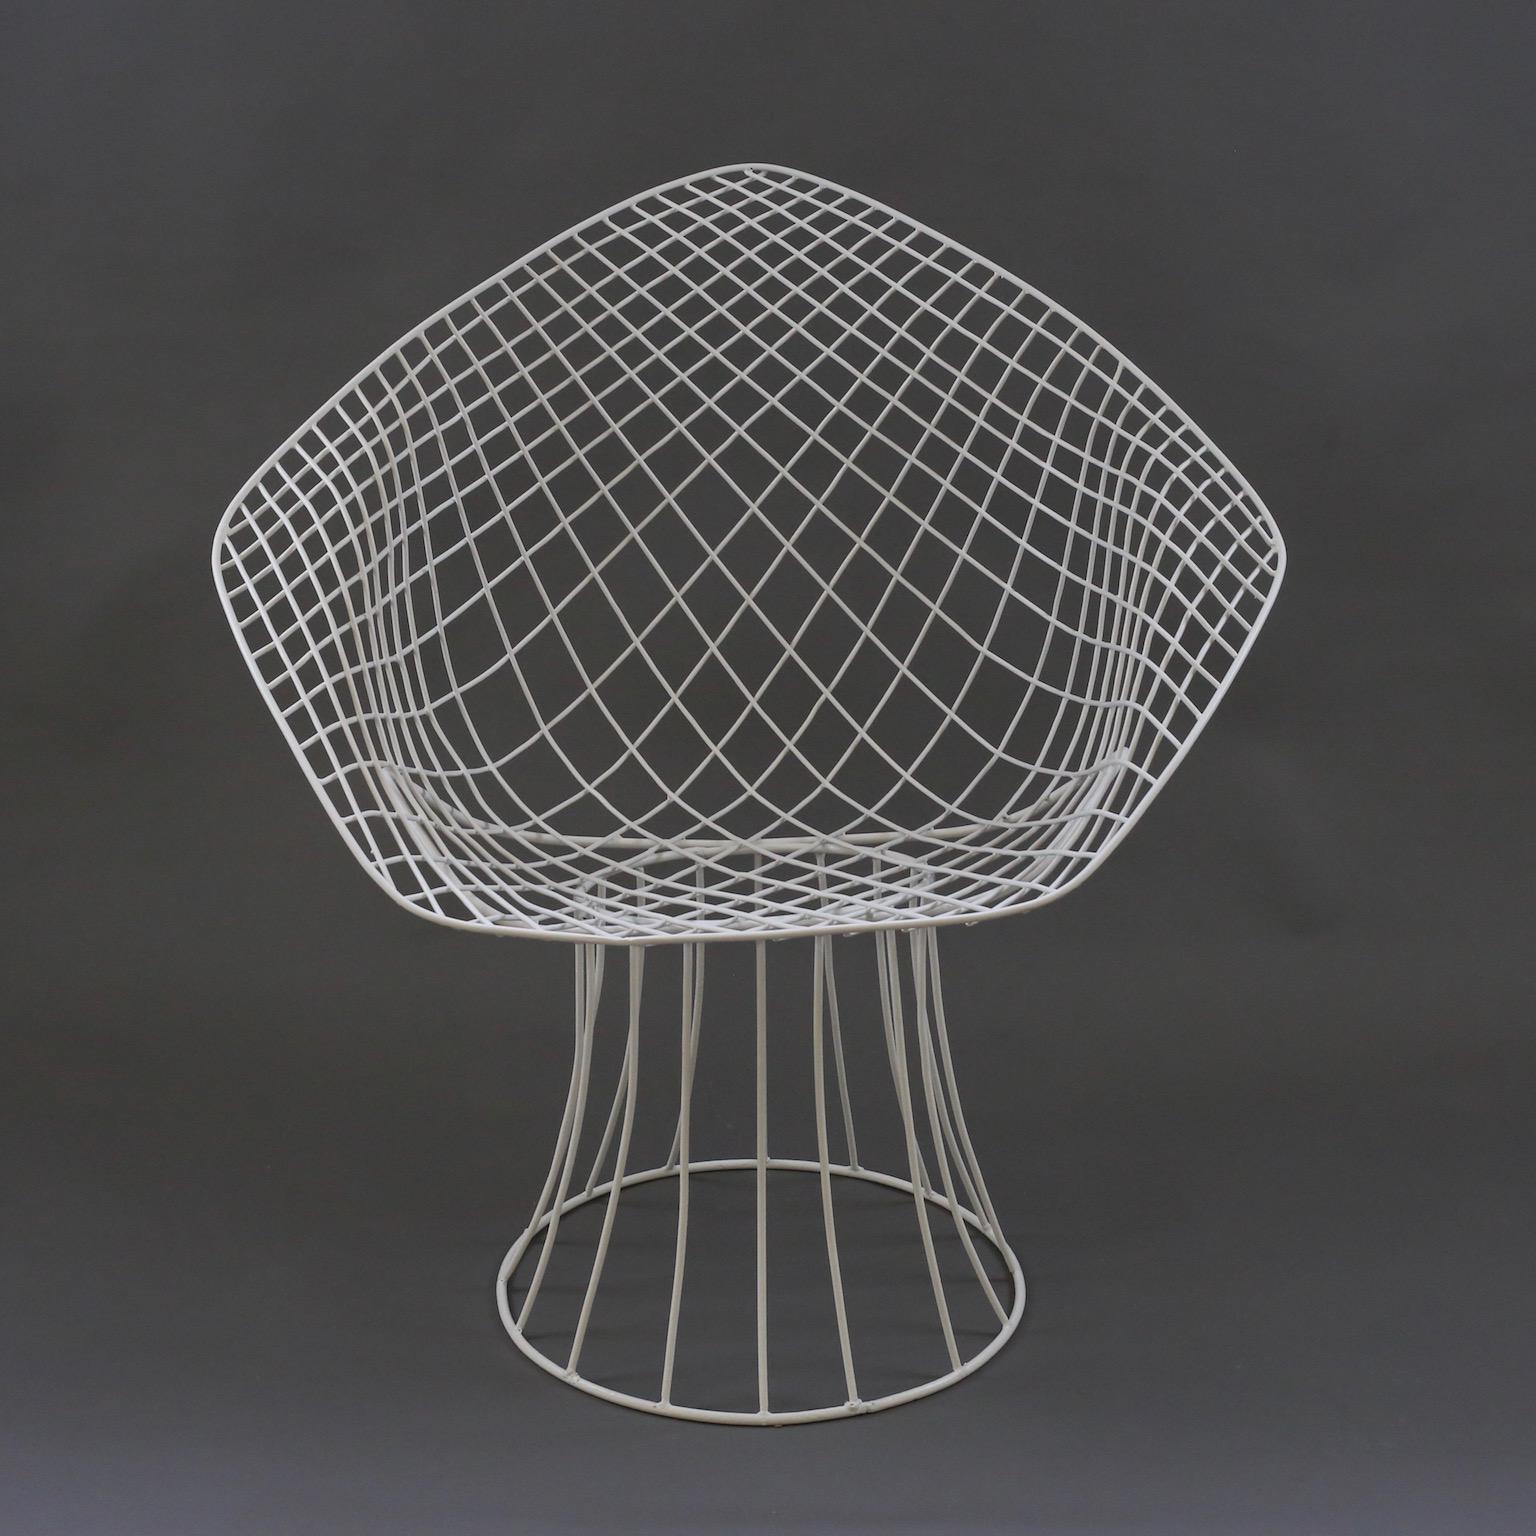 Early 1970s Harry Bertoia wire framed chairs made for Knoll. Original and absolutely fabulous. Outdoors or indoors these are highly desirable. They have been professionally refurbished and powder coated. Priced individually. Six available. ultz